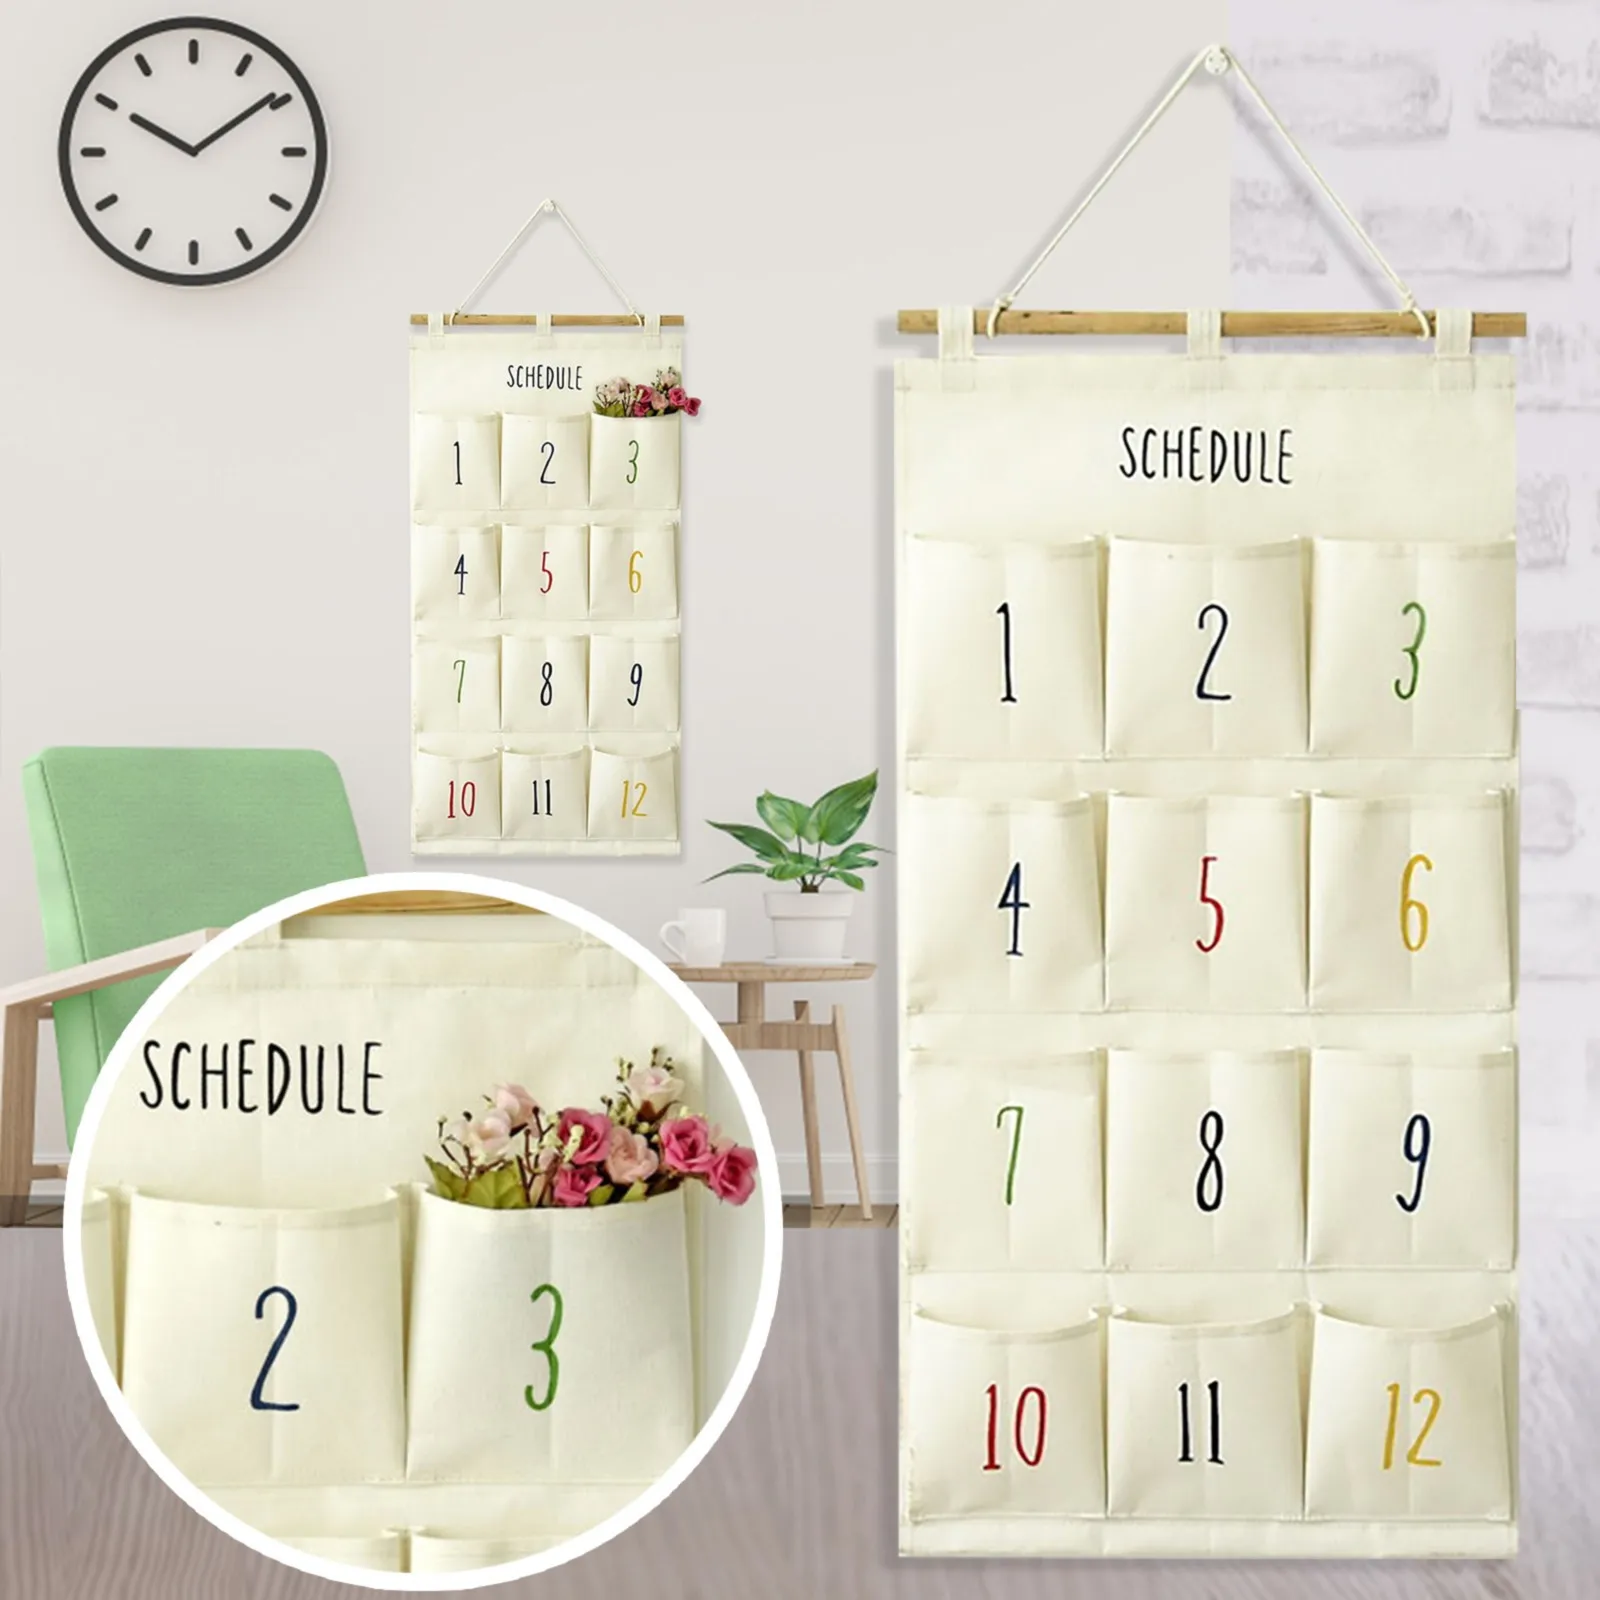 

Creative Monthly Itinerary Storage Over The Door Closet Holder Hanger Storage Bag Rack With 12 Plain Cotton Linen Hanging Bags